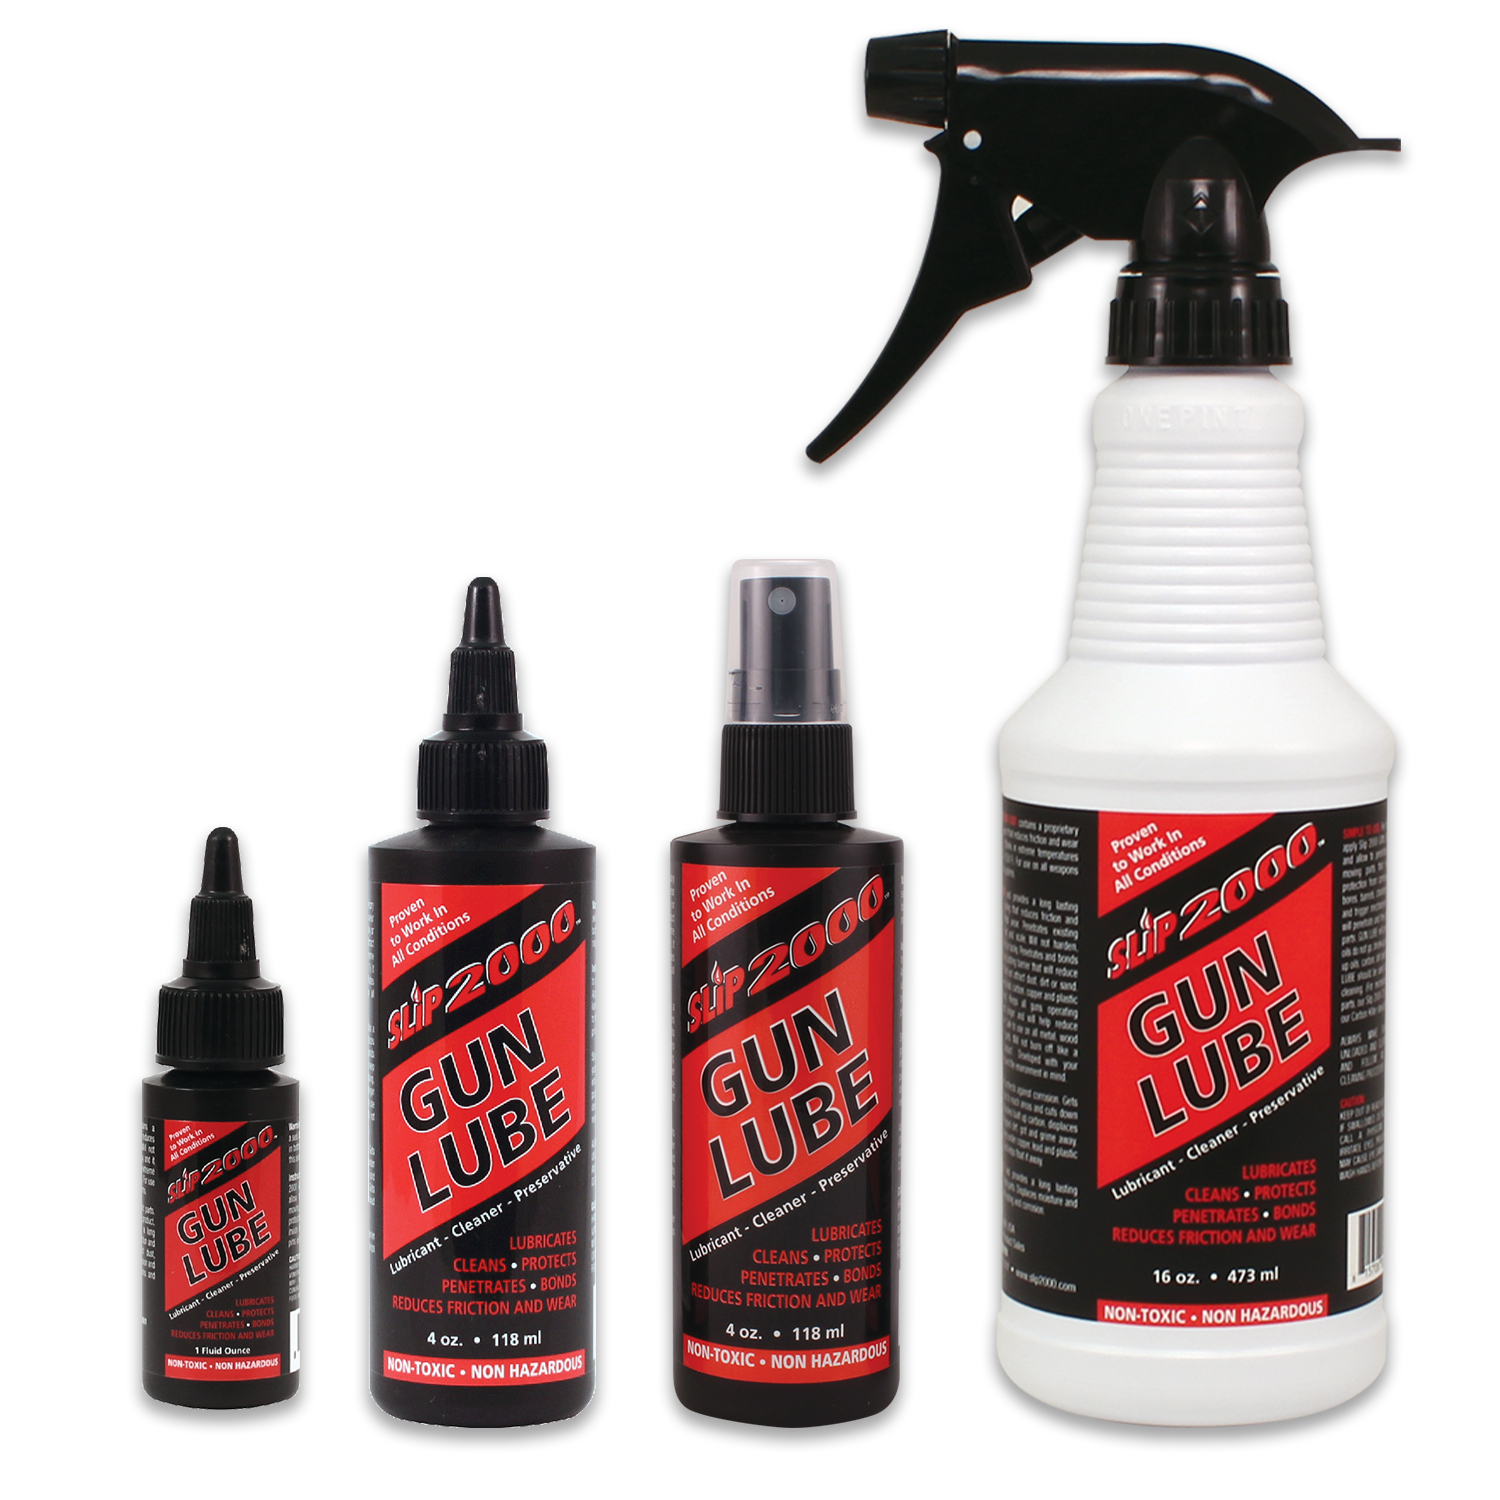 HIGHEST PERFORMANCE Airgun Chamber Lube Pure 100% Silicone Oil 2X more for  less!